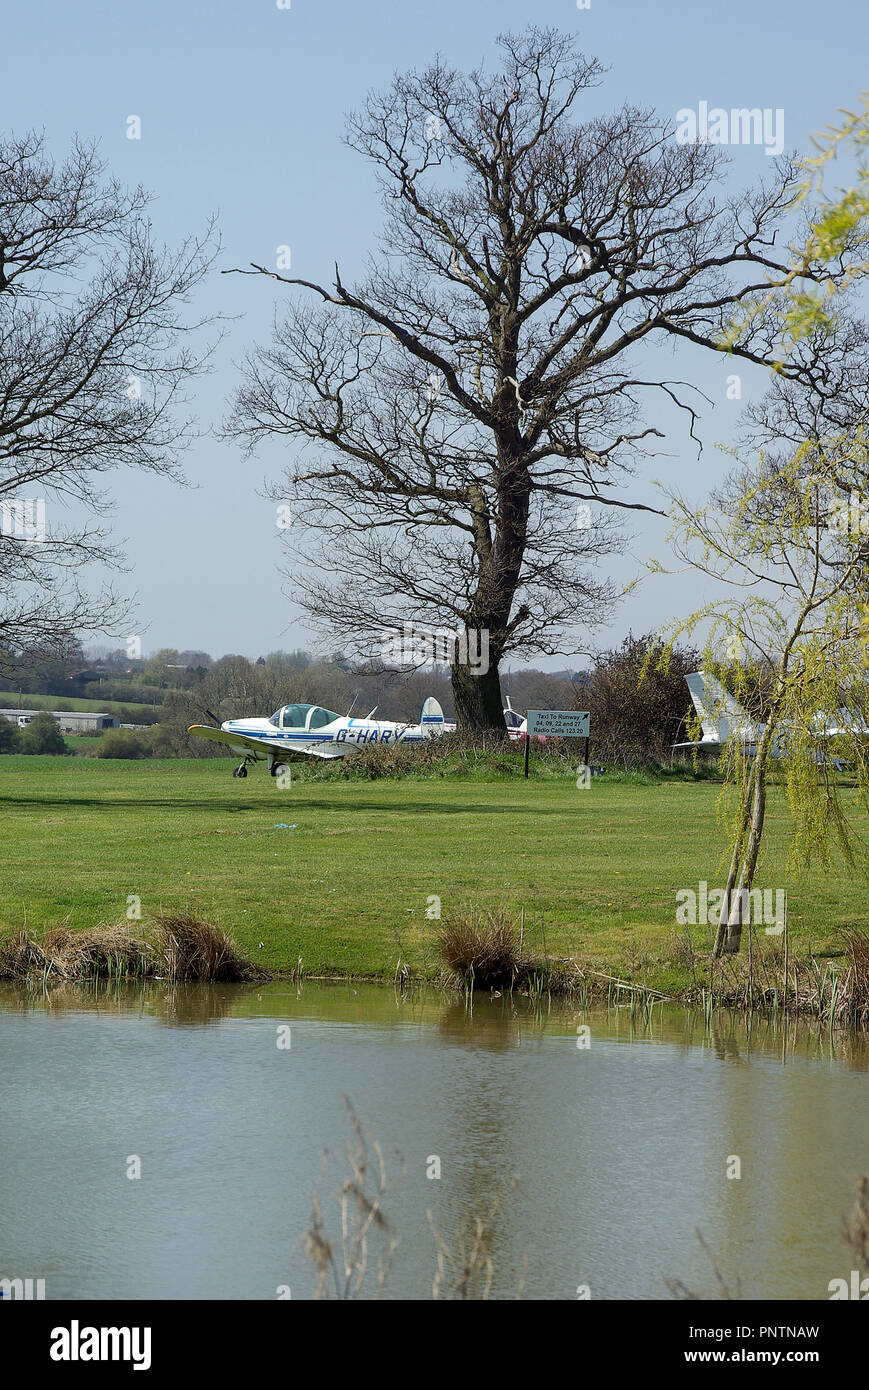 RAeC Air Race Series, Round One 2010 at Great Oakley airfield in Essex, UK. Countryside airfield with pond and trees among the taxiways Stock Photo